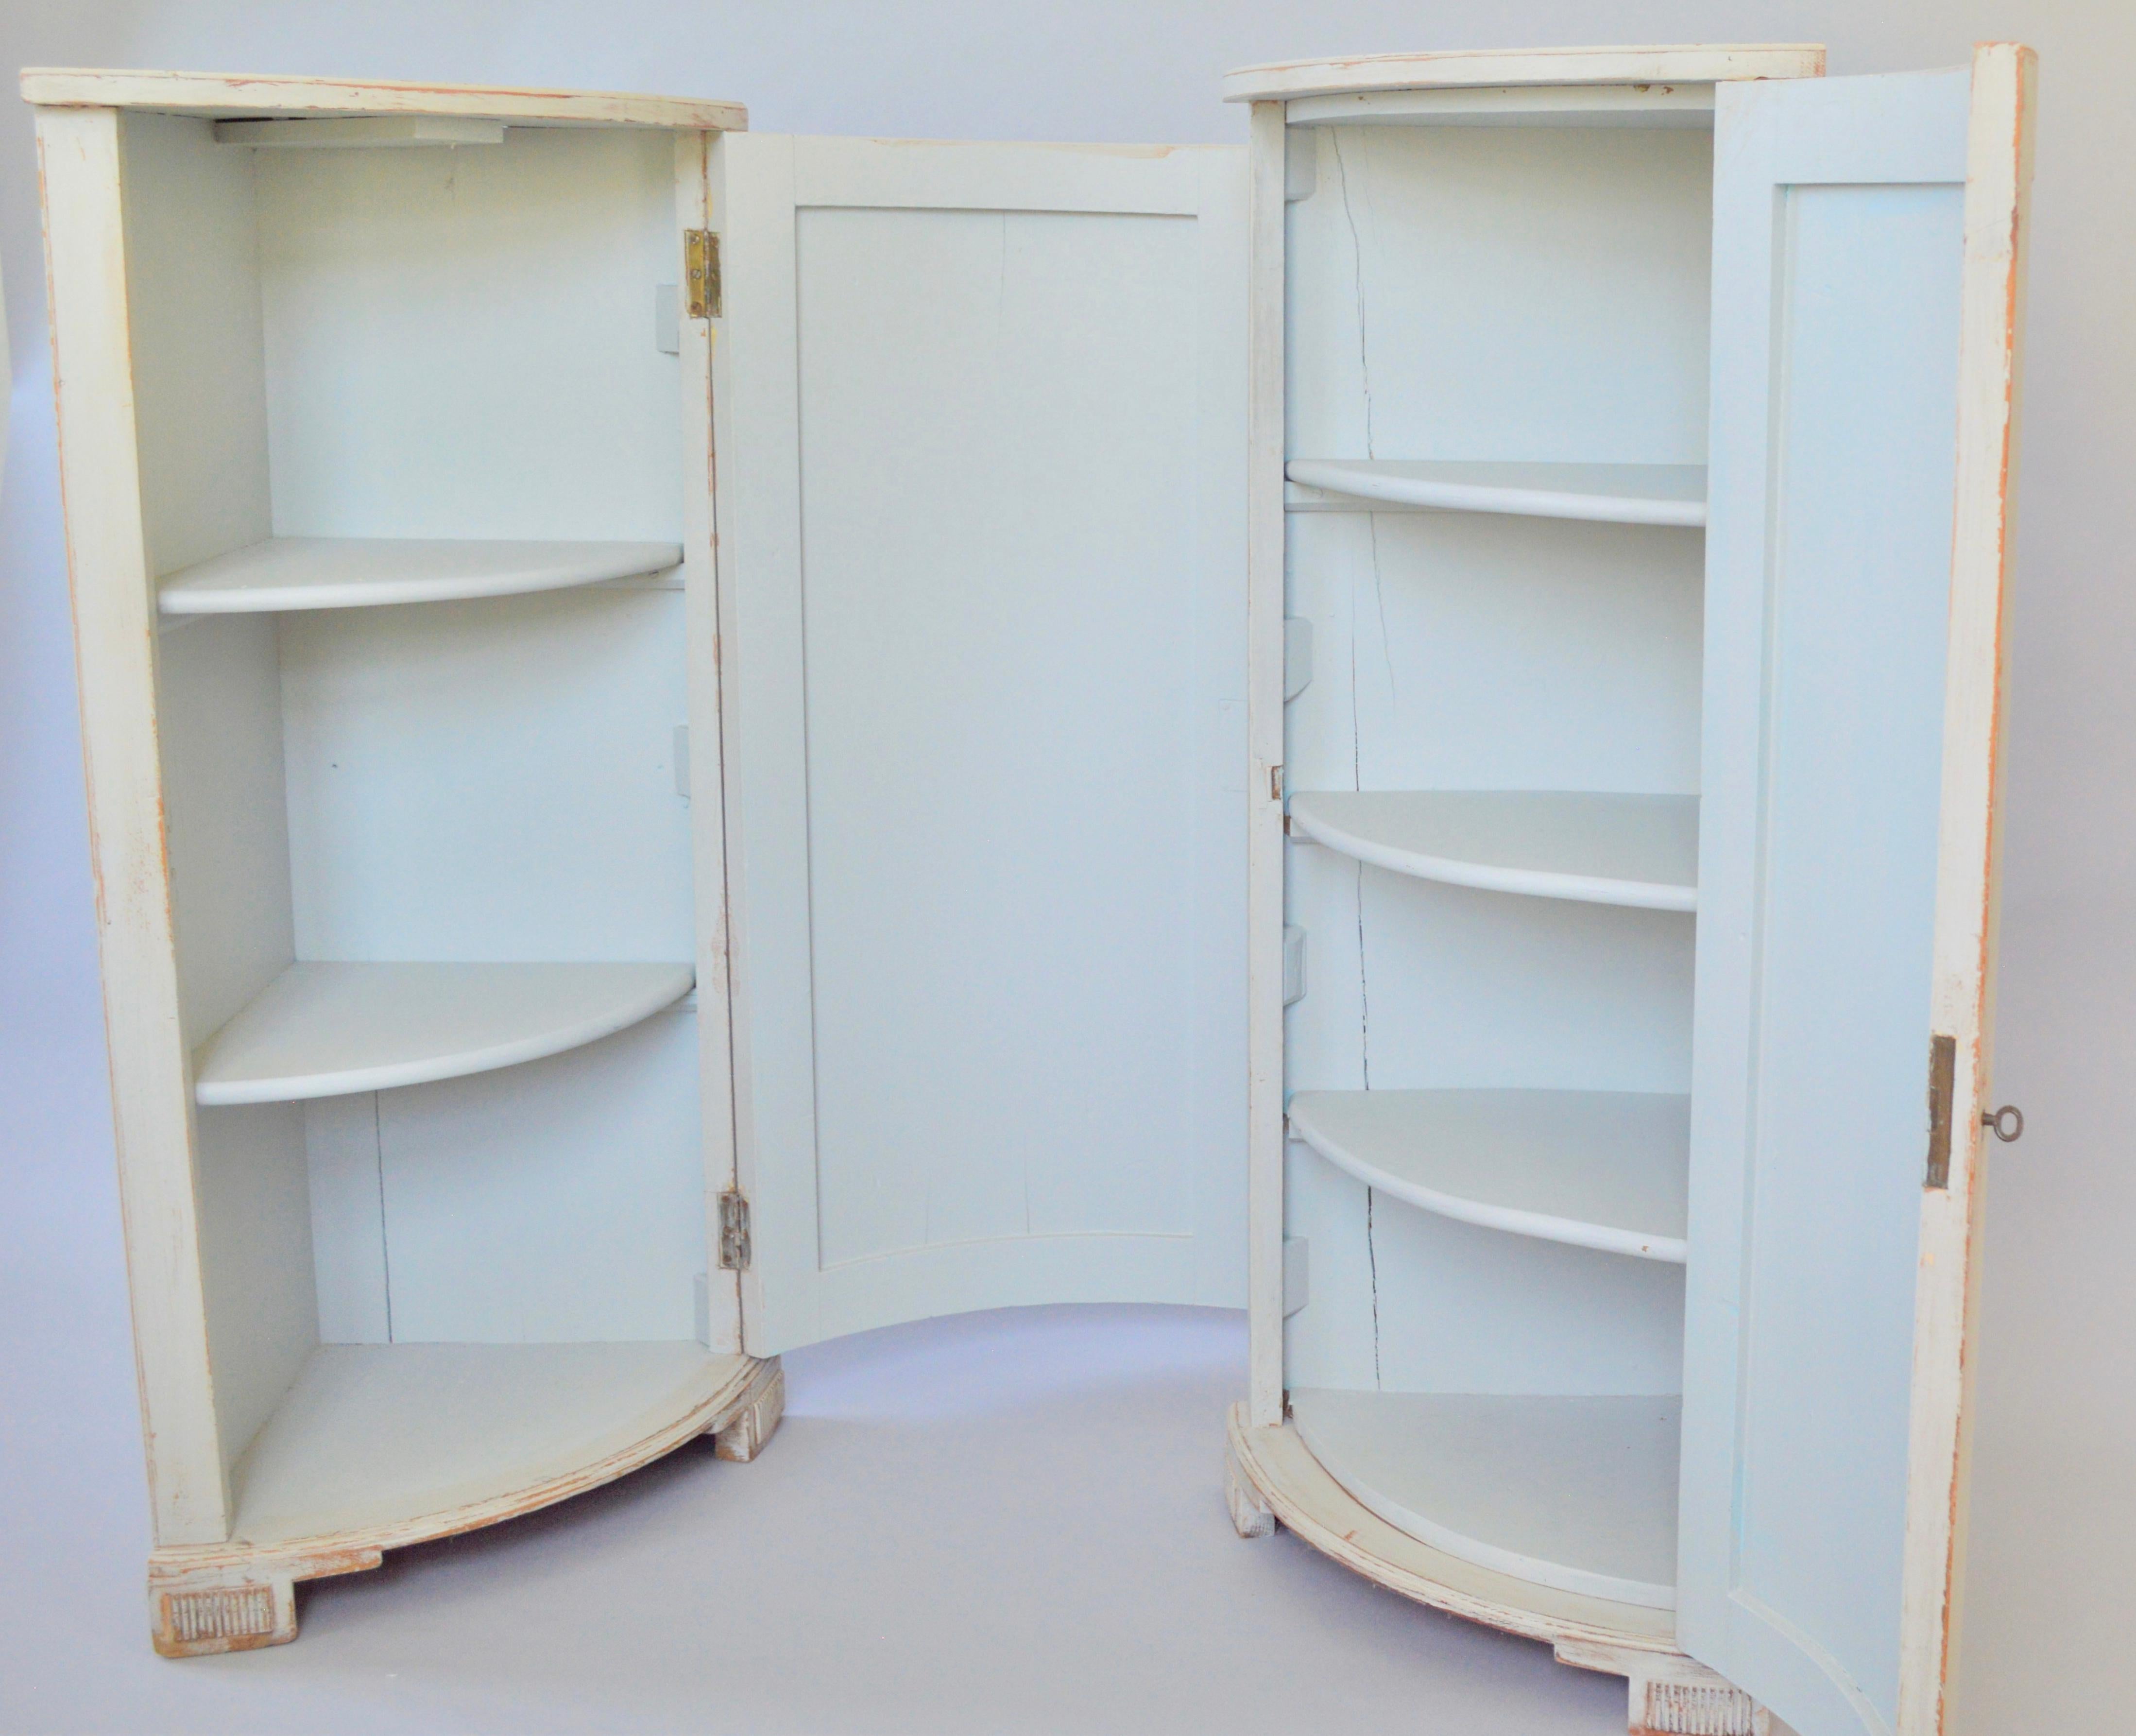 A pair of identical corner cabinets, grisaille grey-blue painted. Richly decorated with hand painted flower urns or vases on the front.
Very high quality painting.
The one has 3 shelves the other one has 4.